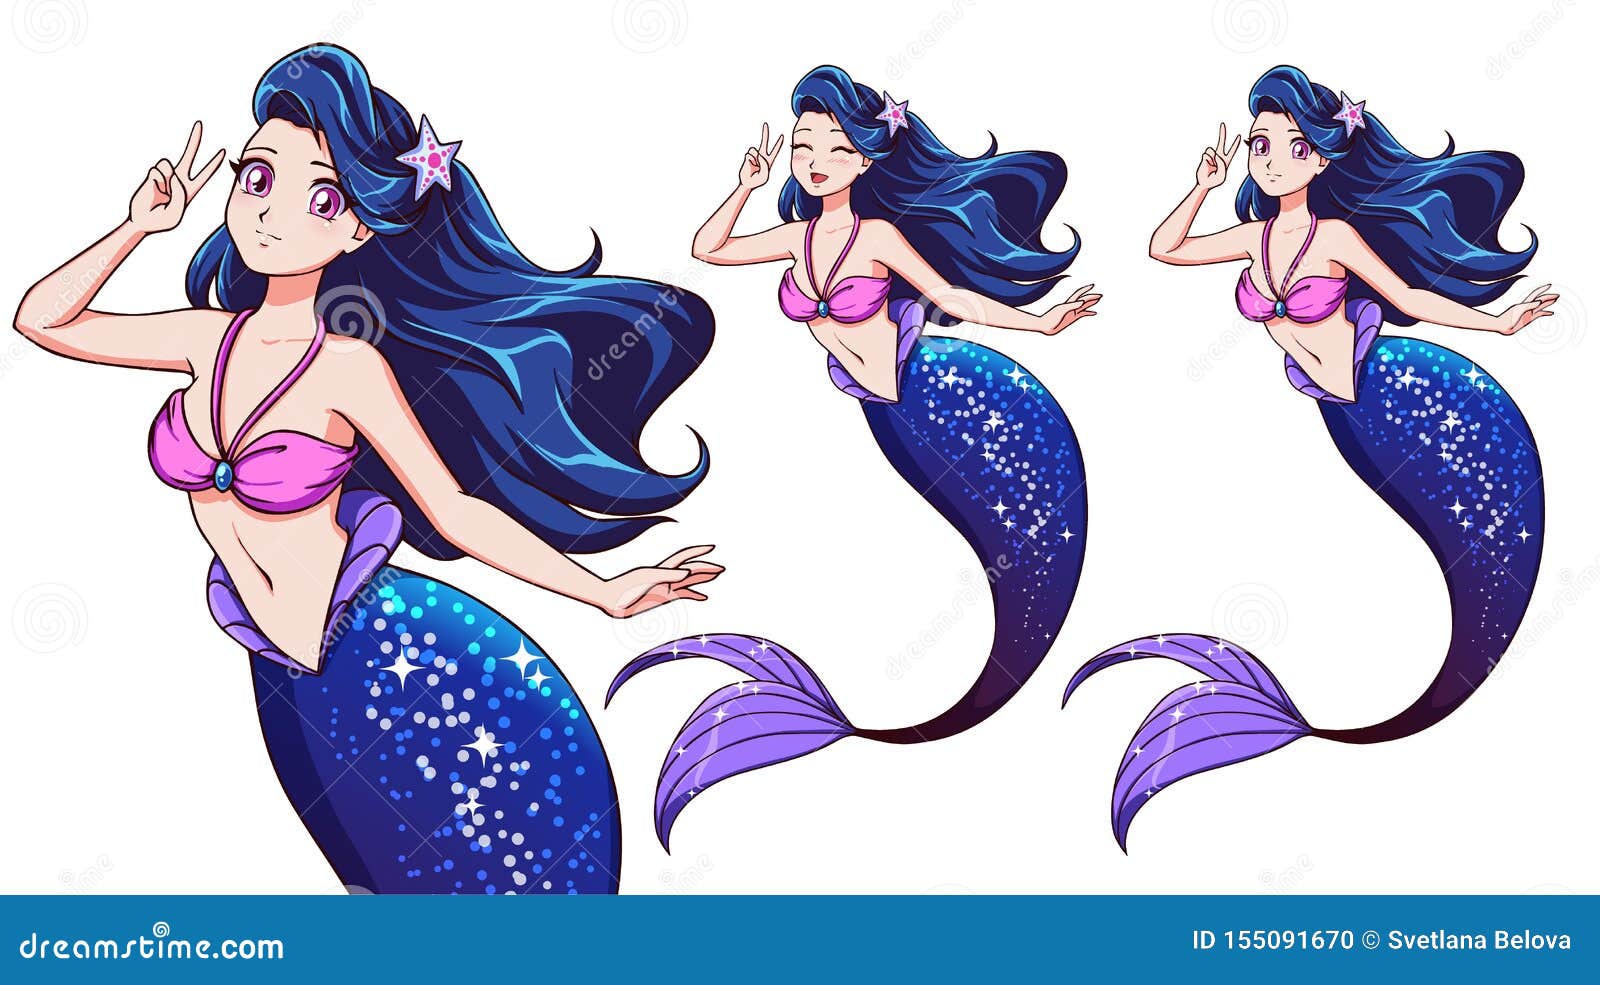 Pretty Anime Mermaid Using a V Sign. Blue Hair and Shiny Blue Fish Tail  Stock Vector - Illustration of design, ocean: 155091670